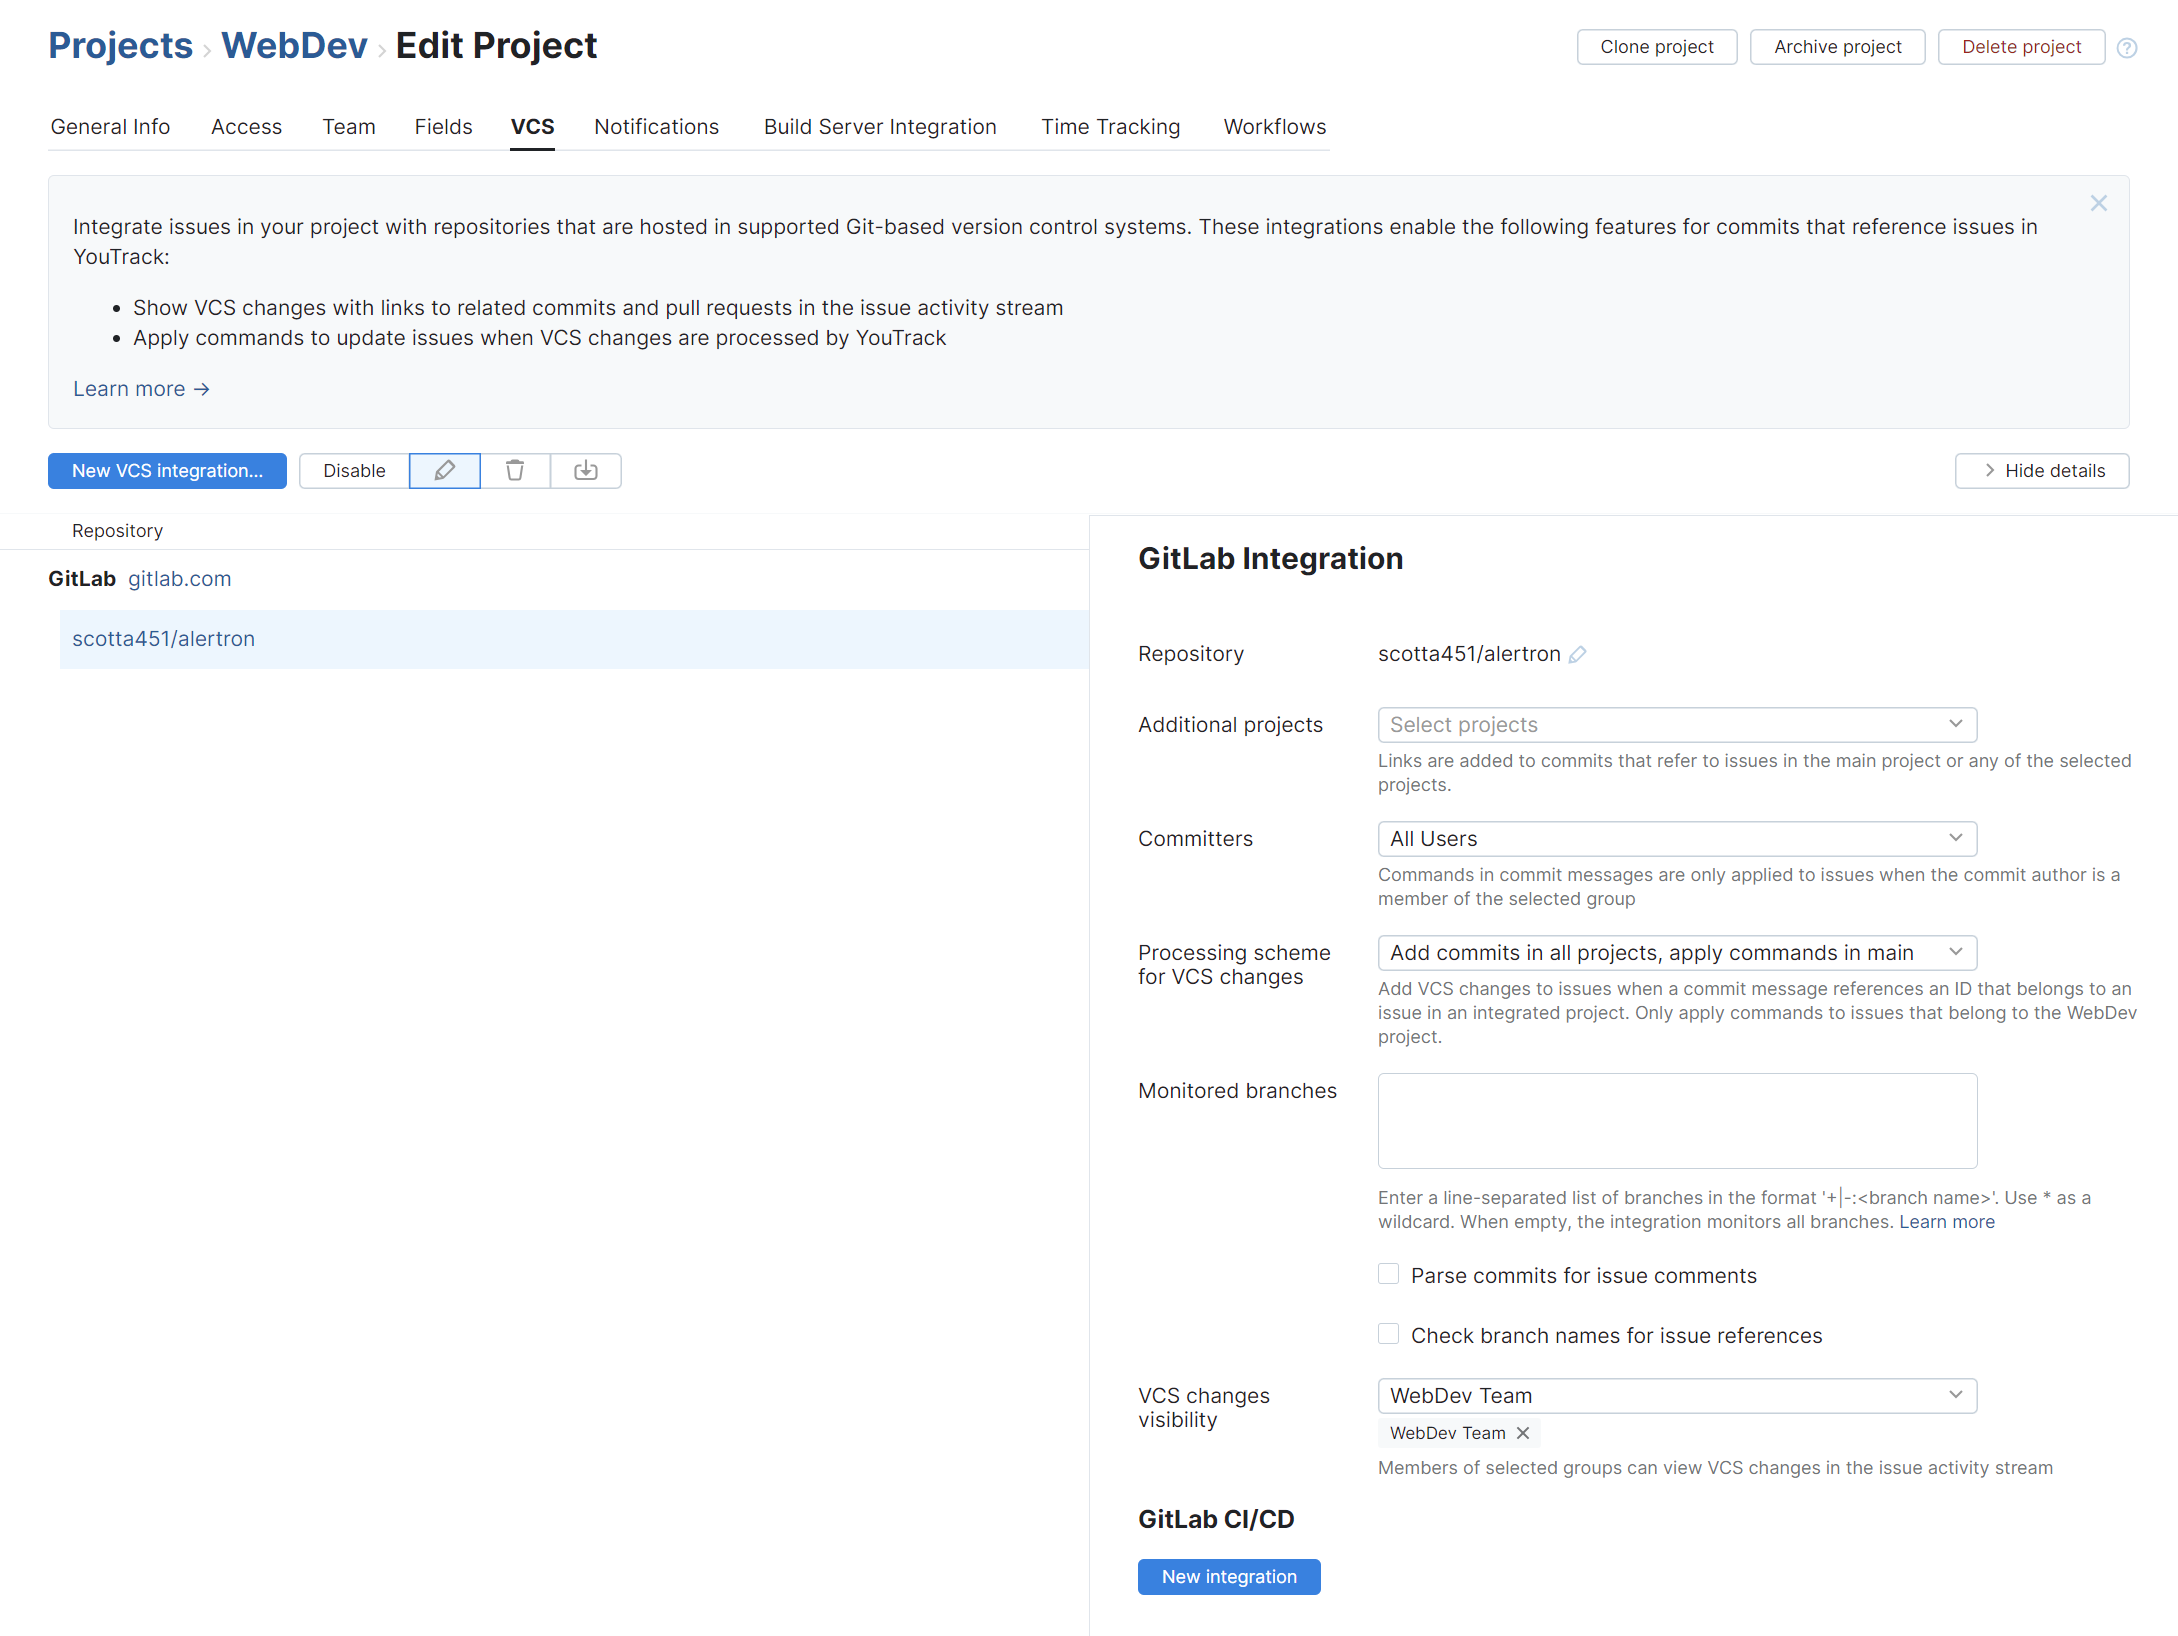 Link to access VCS integration settings from the Project Overview page.